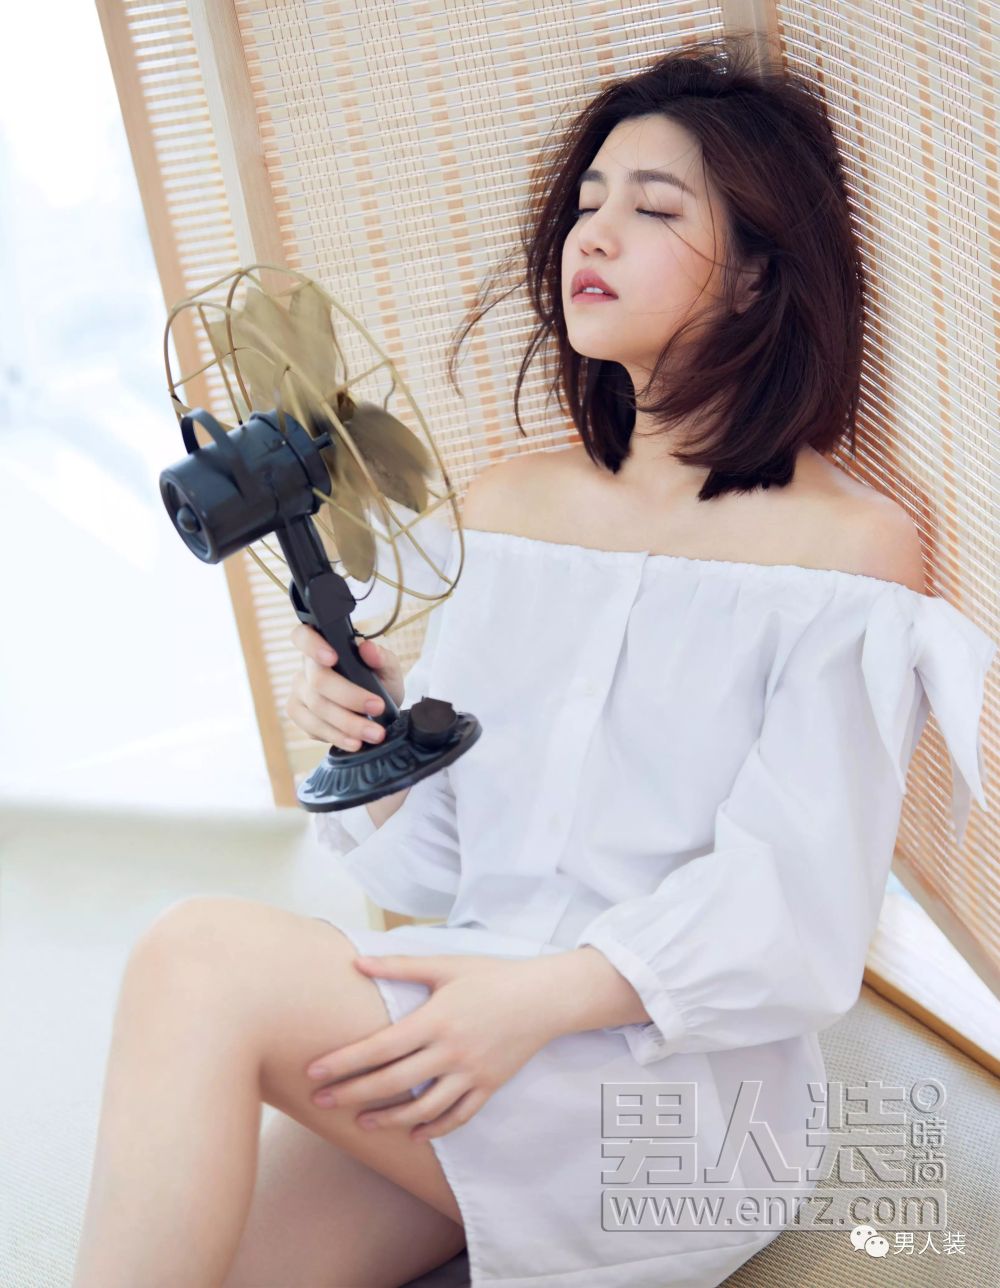 Michelle Chen Sexy and Hottest Photos , Latest Pics